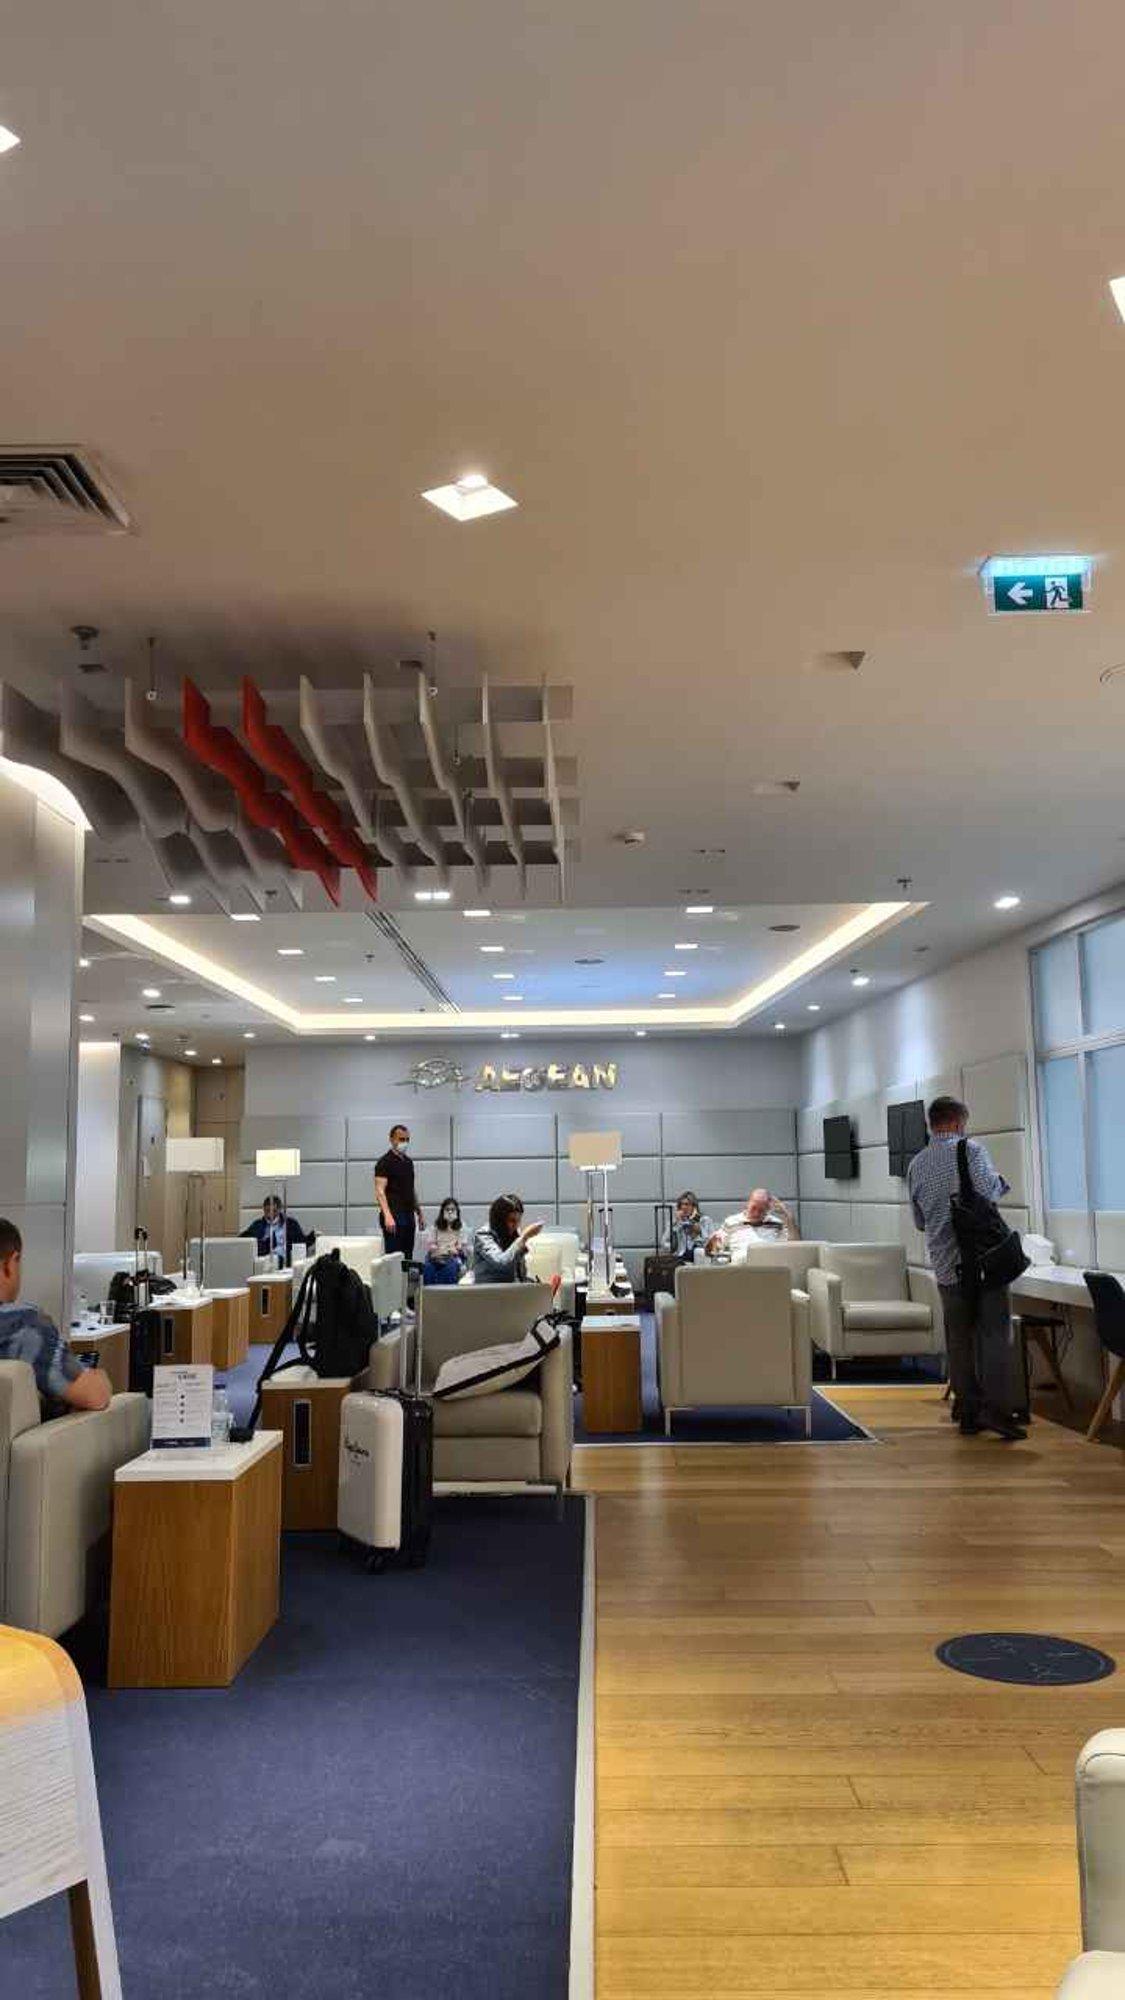 Aegean Business Lounge image 11 of 11